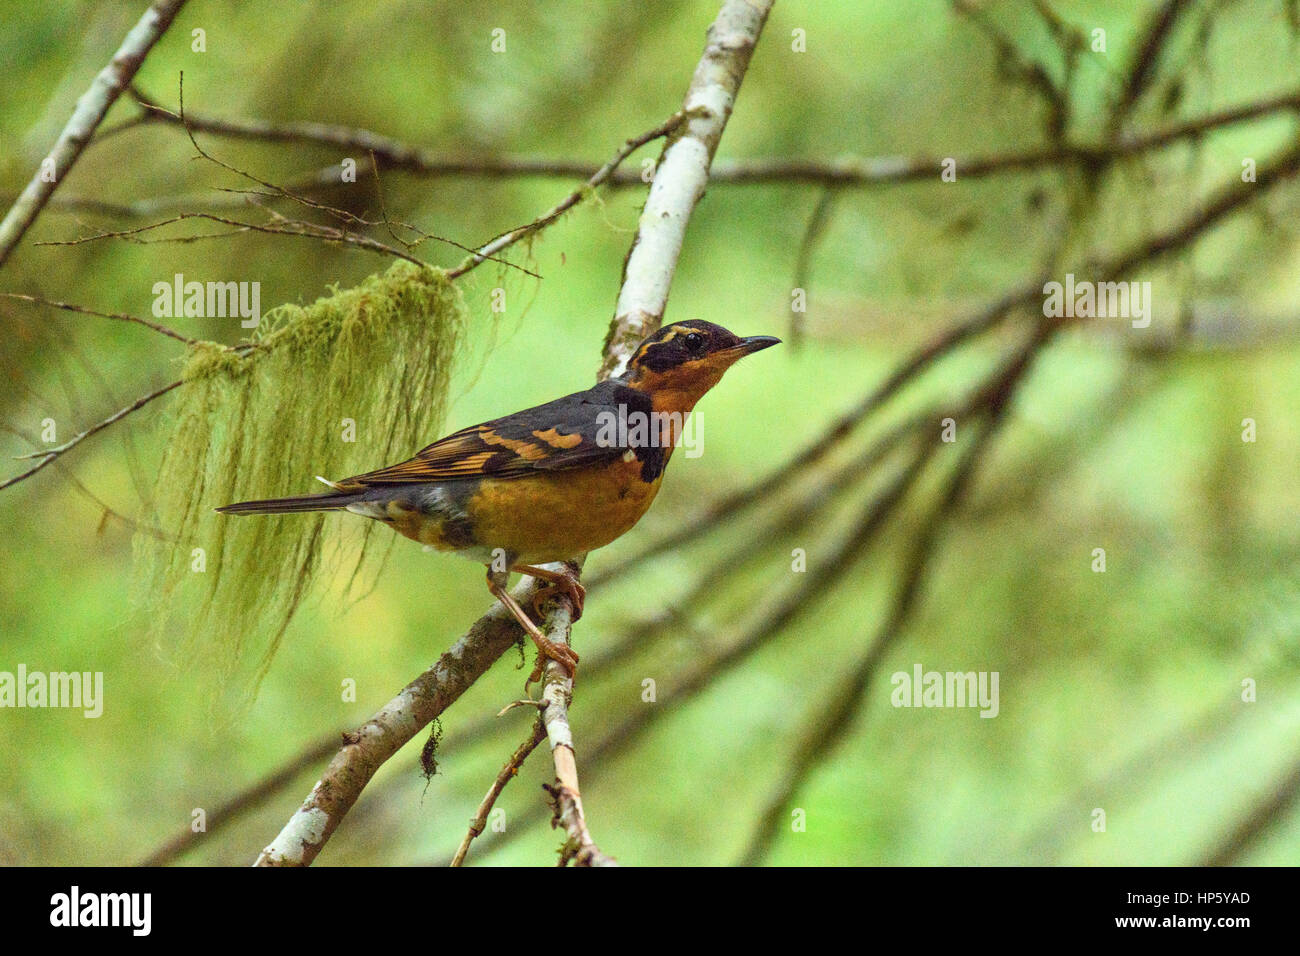 A Varied Thrush Perched Low in the Canopy of an Alaskan Forest Stock Photo